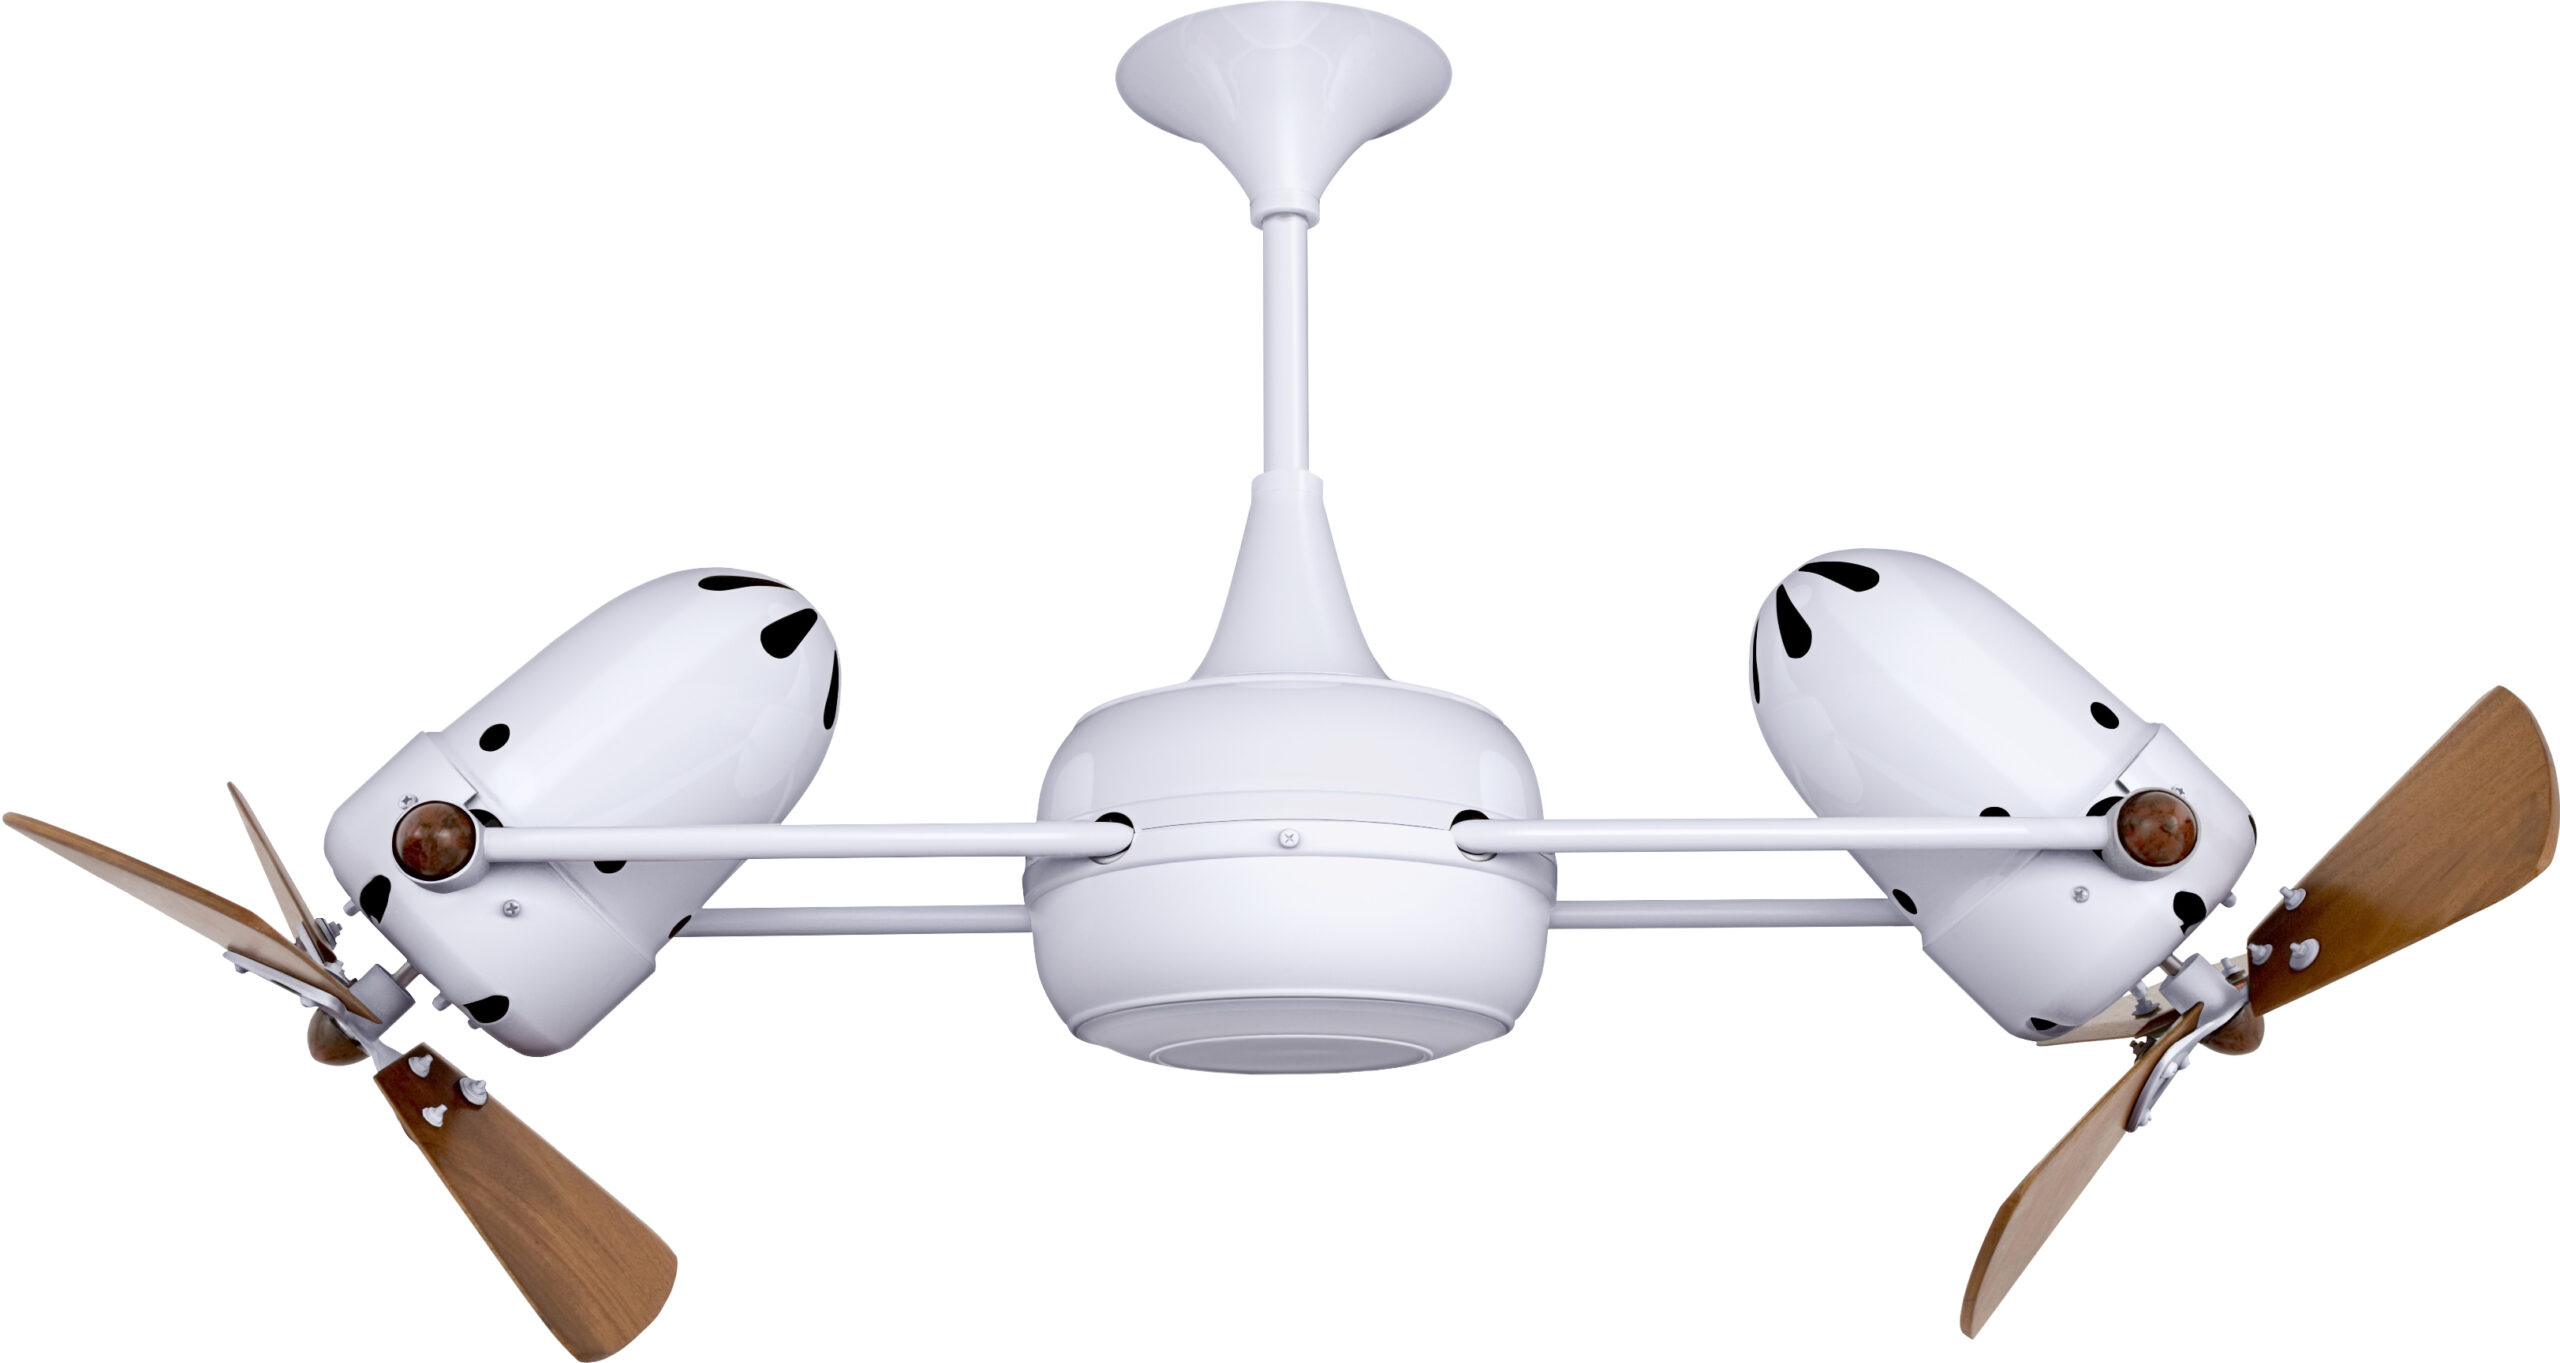 Duplo Dinamico rotational dual head ceiling fan in Gloss White finish with Mahogany wood blades made by Matthews Fan Company.